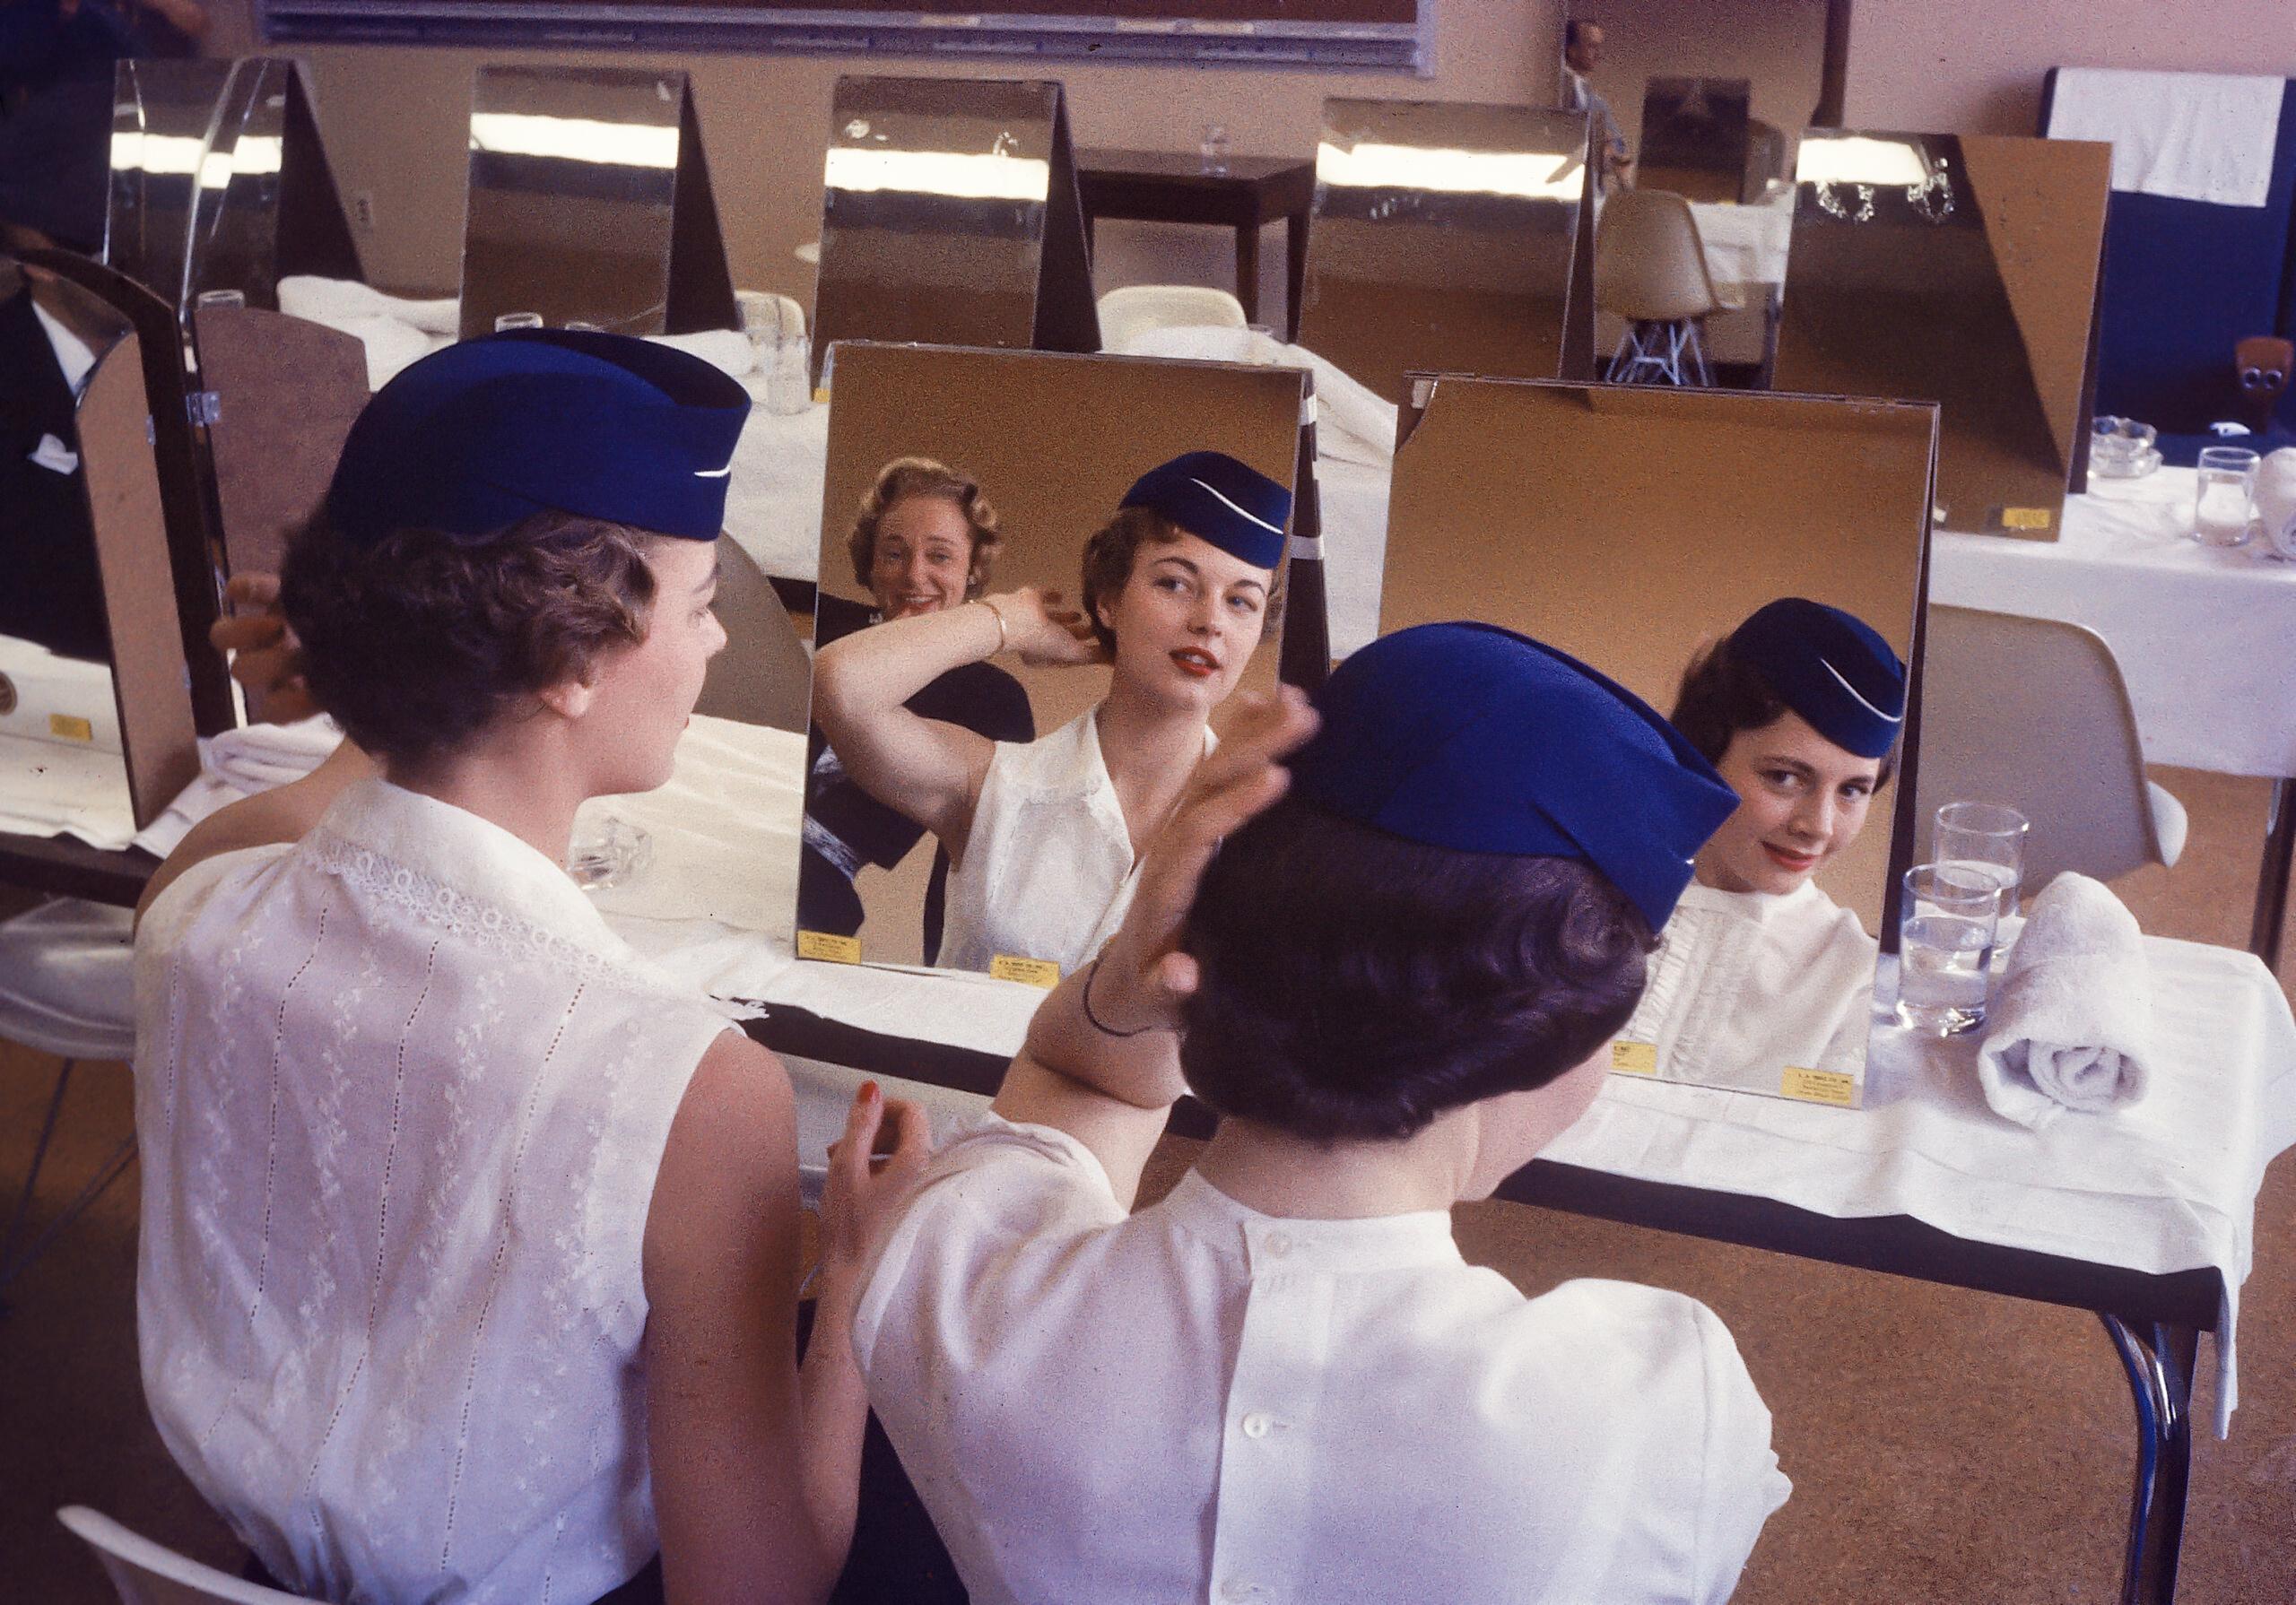 Stewardesses in training at the American Airlines college for new flight attendants in Texas, 1958.jpg